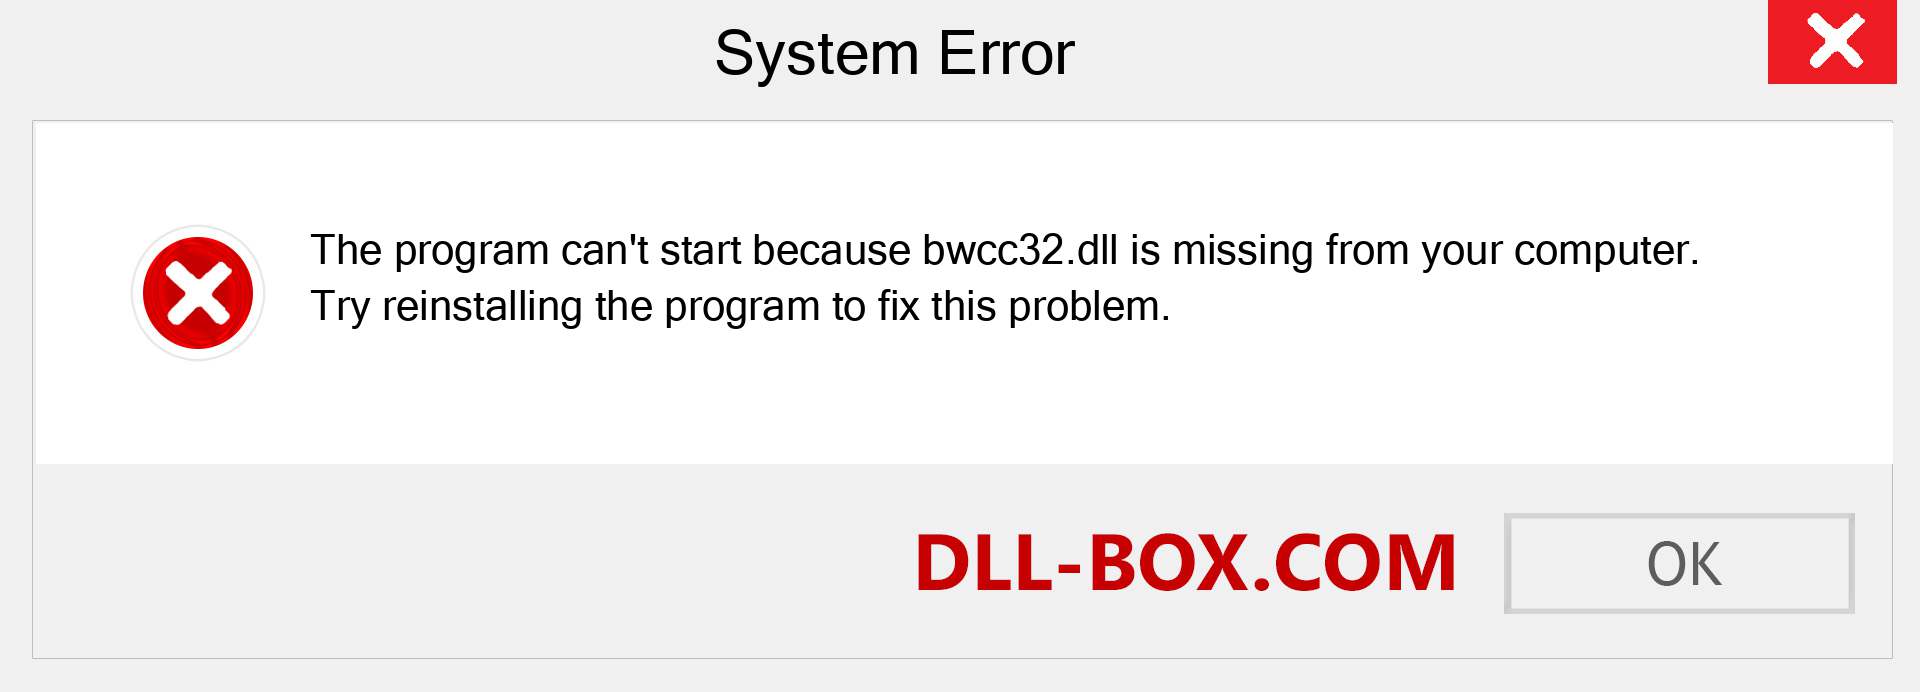  bwcc32.dll file is missing?. Download for Windows 7, 8, 10 - Fix  bwcc32 dll Missing Error on Windows, photos, images